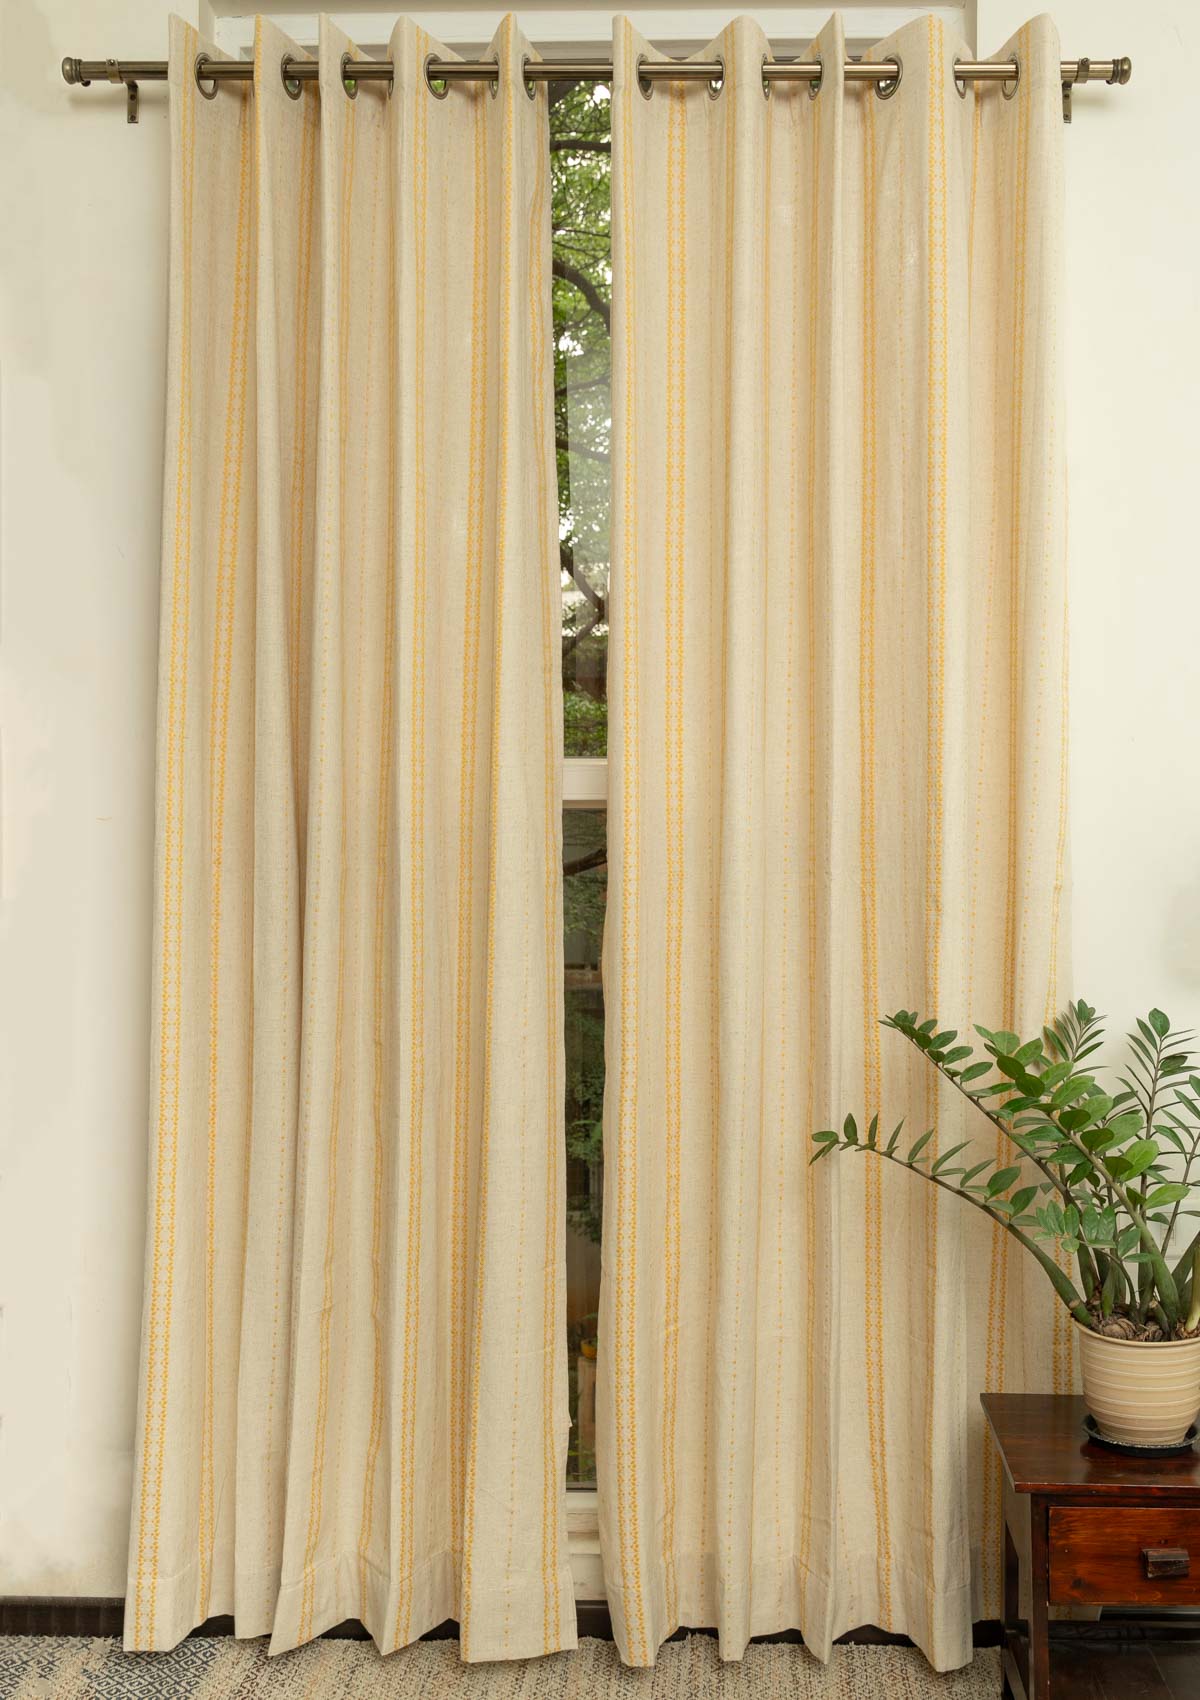 Aster linen customizable 100% cotton embroidered geometric curtain for living room - Room darkening - Mustard